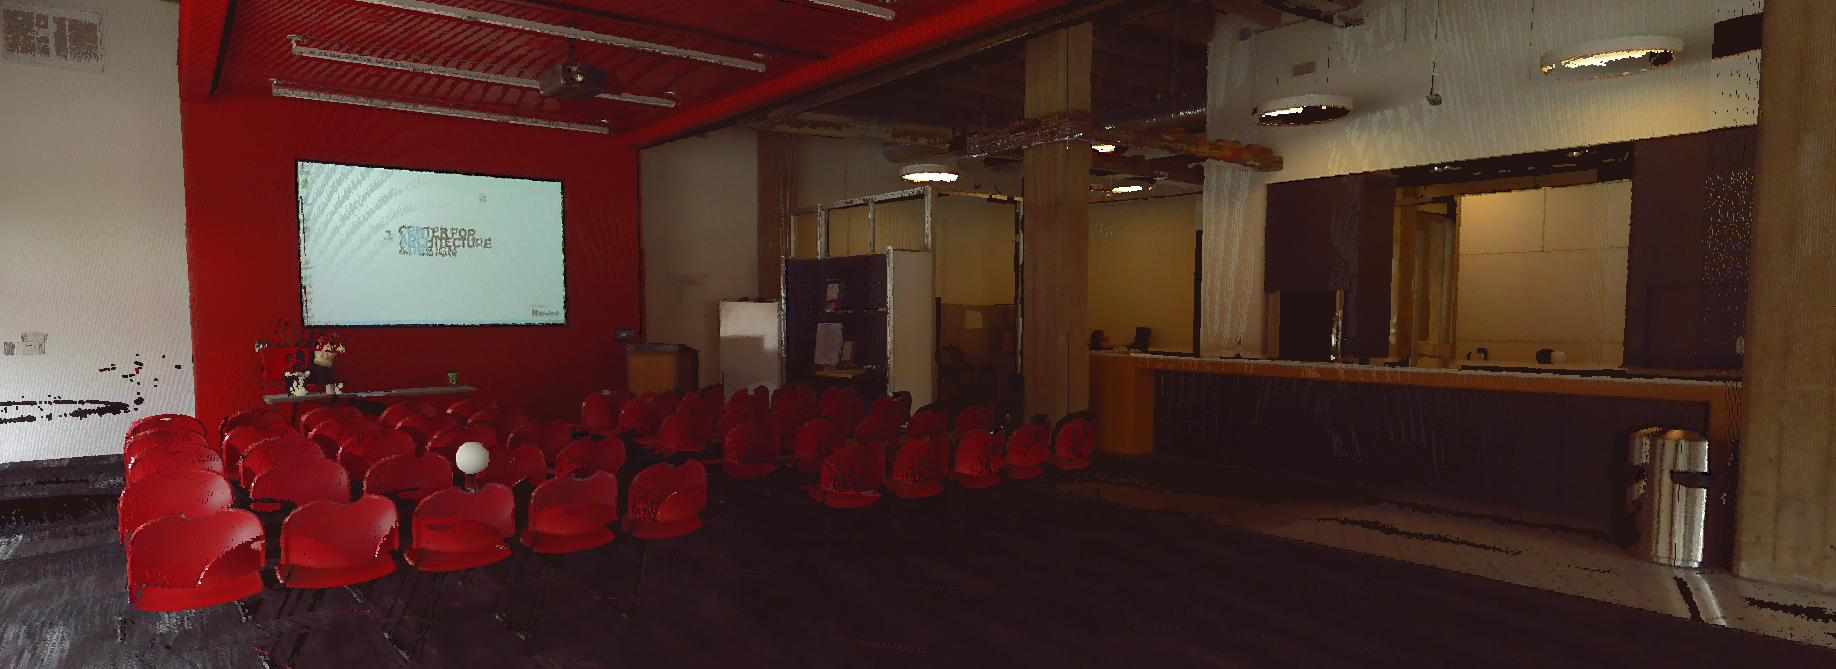 conference room and theater laser scan